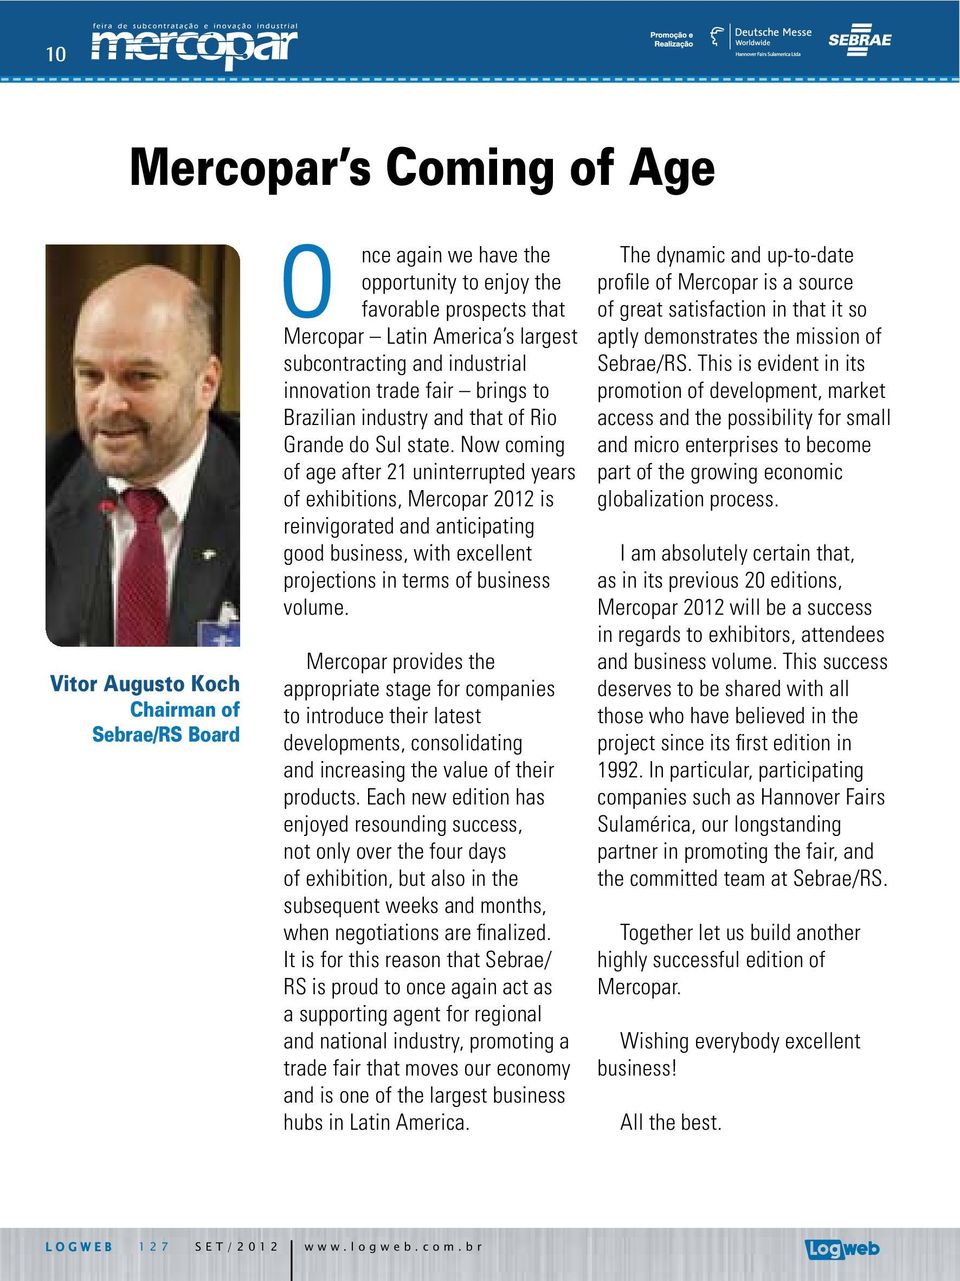 Now coming of age after 21 uninterrupted years of exhibitions, Mercopar 2012 is reinvigorated and anticipating good business, with excellent projections in terms of business volume.